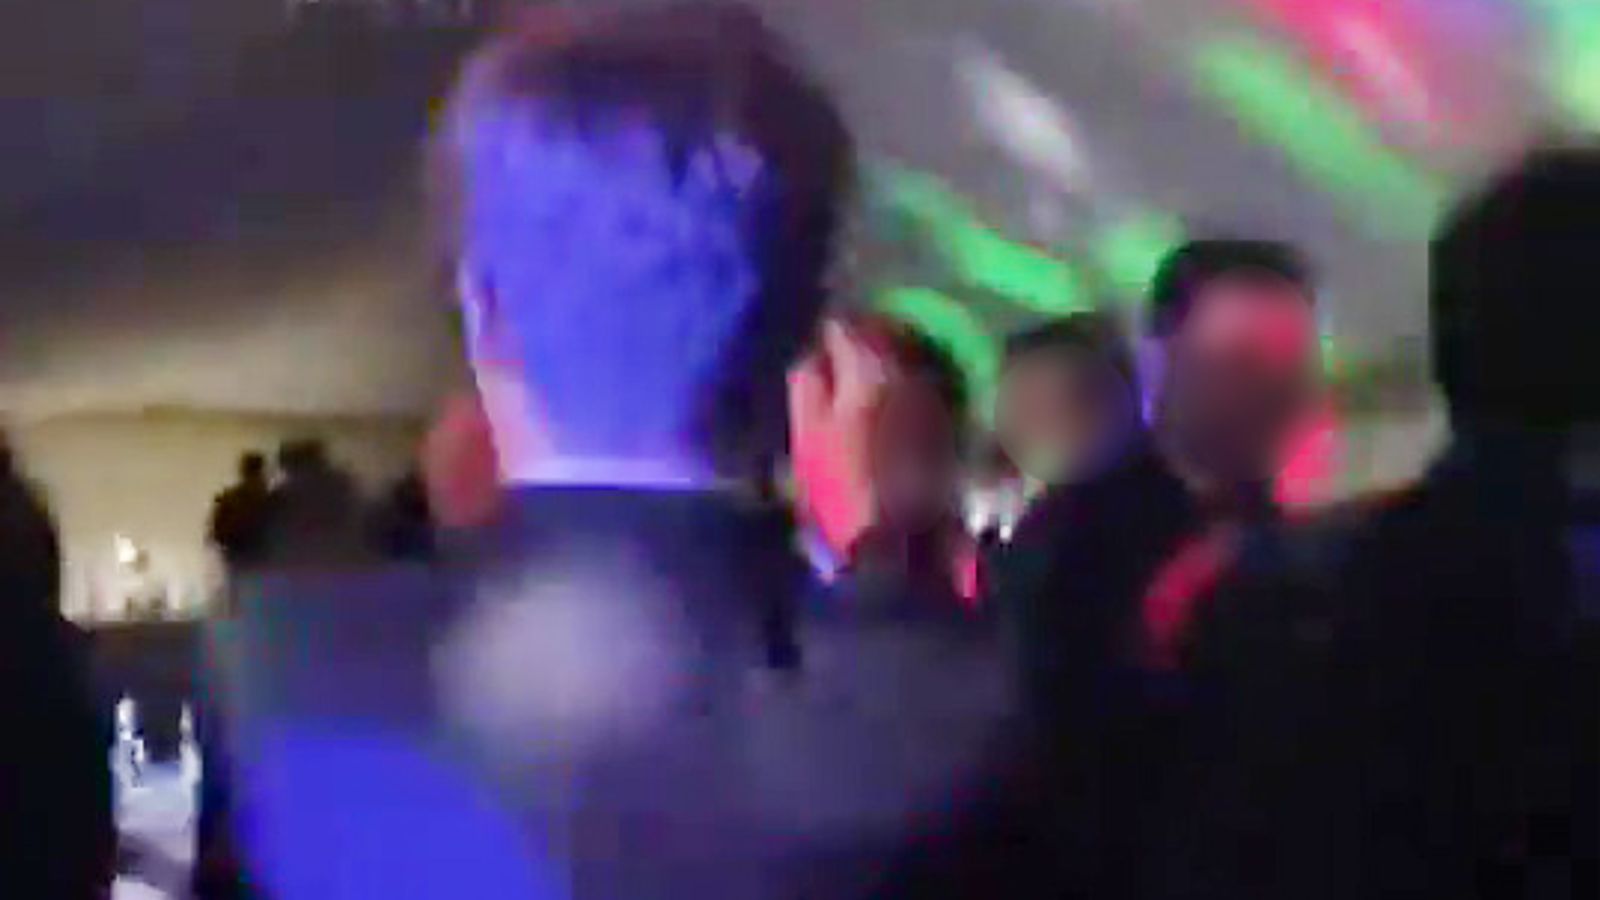 Warwick: Tory student group apologises over video 'showing members singing and dancing to Nazi song'